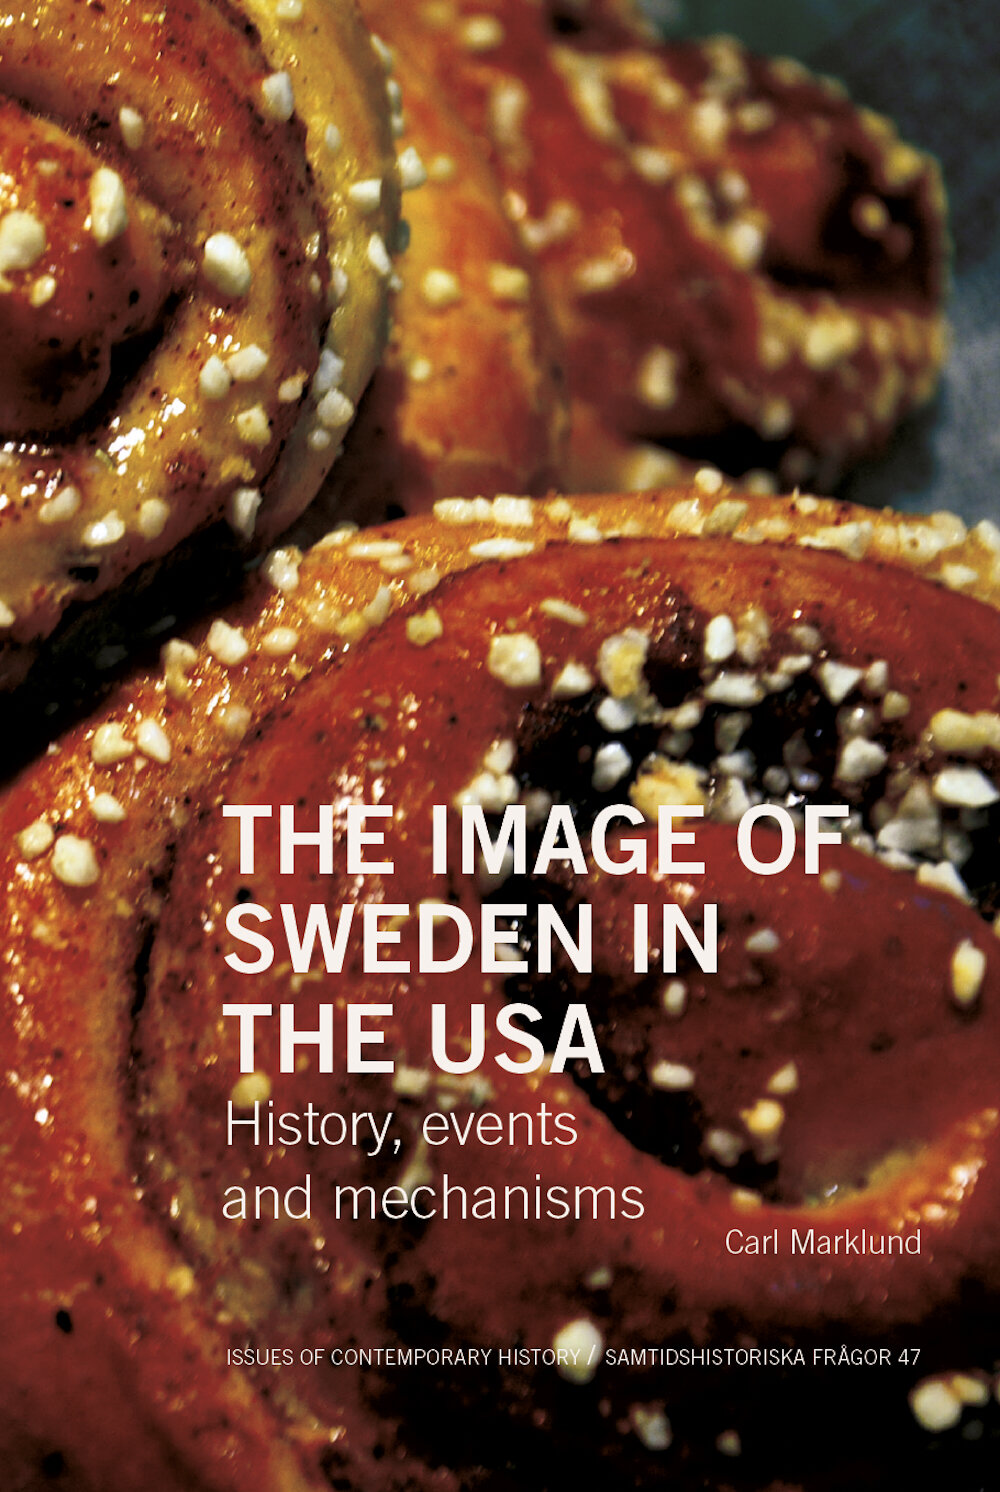 Sweden seen through the eyes of the US: Changing perceptions?